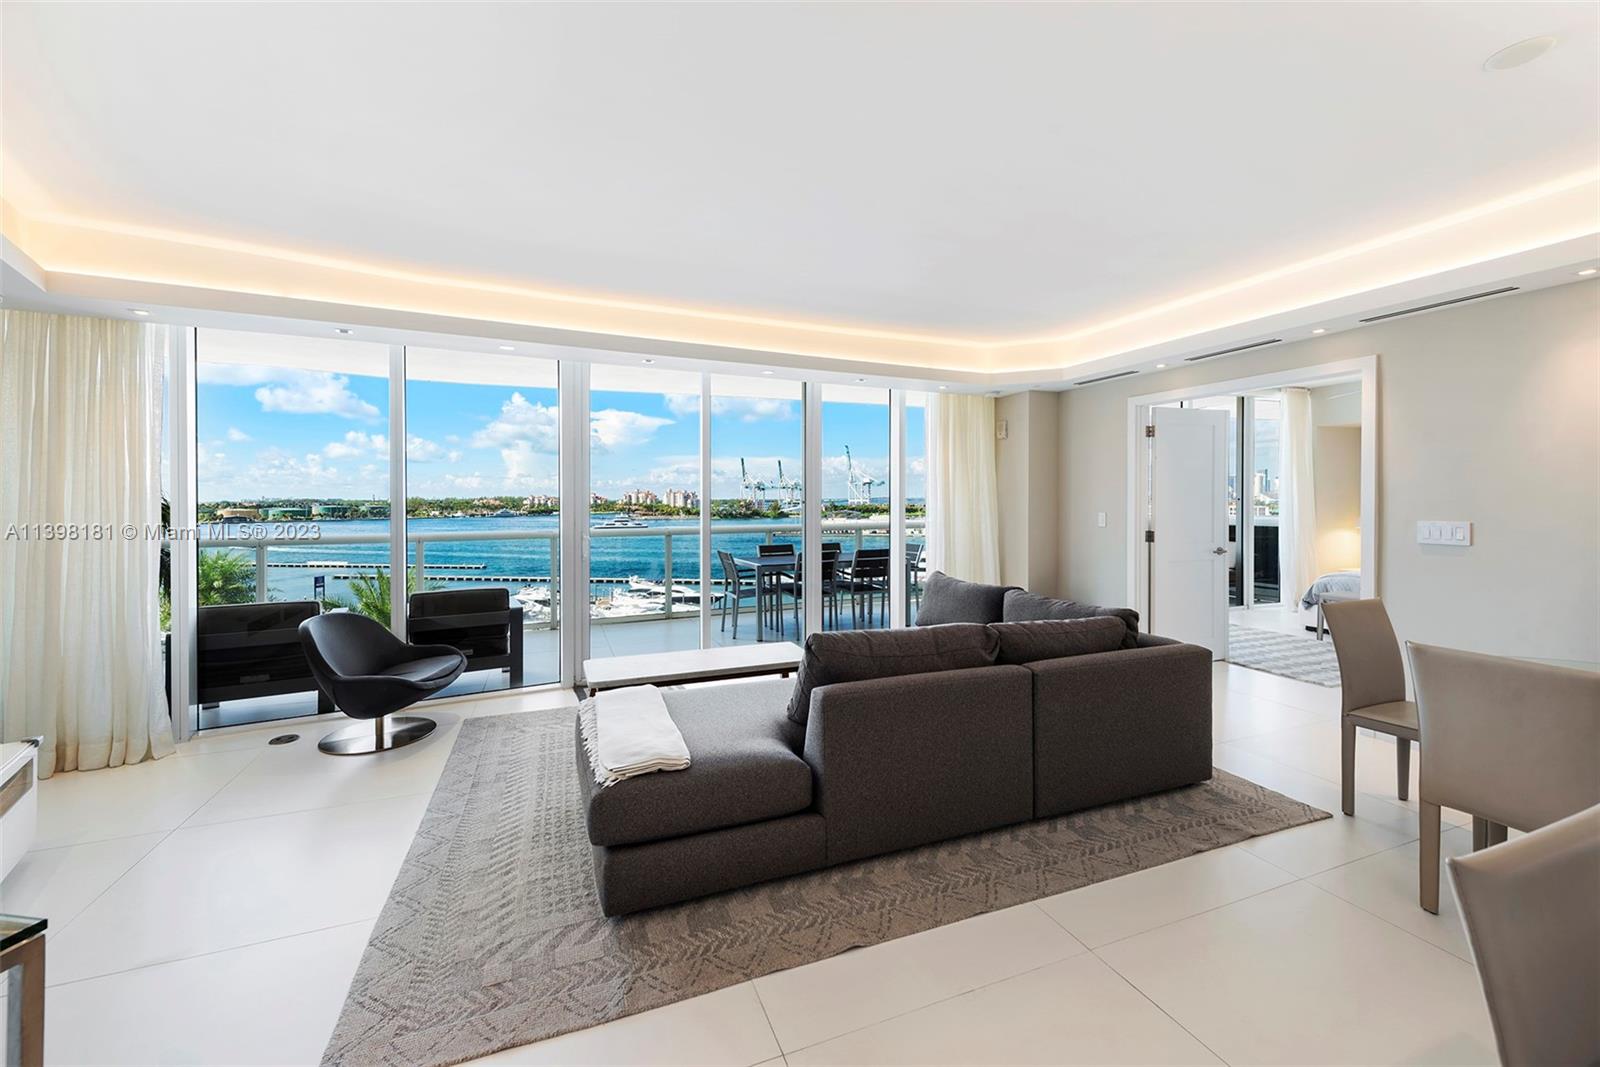 Enjoy incredible water views and Miami city skyline views from 804 at Murano Grande, located in the iconic South of Fifth neighborhood. Stand out features include a state-of-the-art Snaidero Kitchen, Miele Appliances, 40 x 40 tile, ceiling lighting plan, and so much more. All materials, surfaces and fixtures have been hand-selected to achieve a supreme level of style, comfort and luxury. Facing south, with incredible light, the views from 804 are breathtaking. 5 star amenities include tennis, heated pool, private restaurant, gym, steam, sauna and more. Life at Murano Grande is sublime!